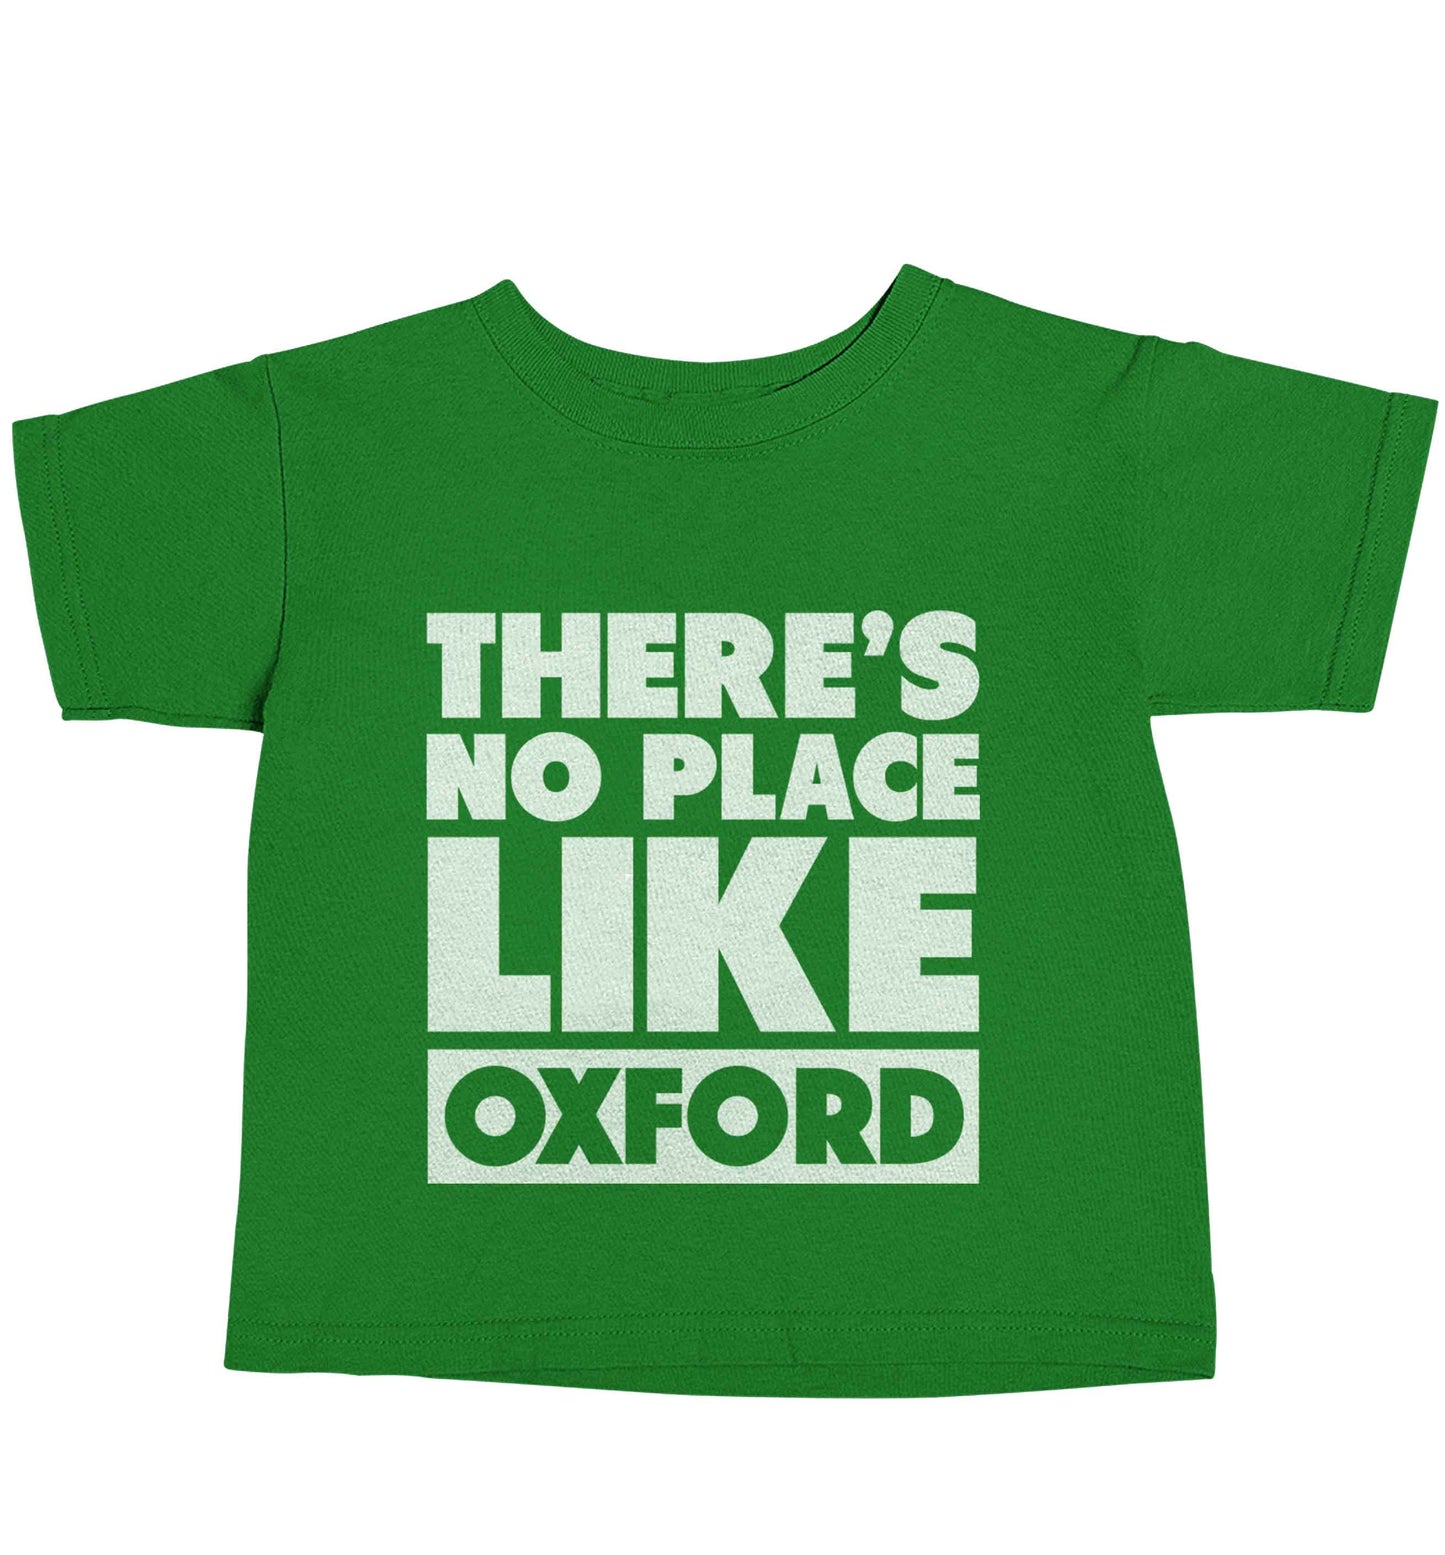 There's no place like Oxford green baby toddler Tshirt 2 Years